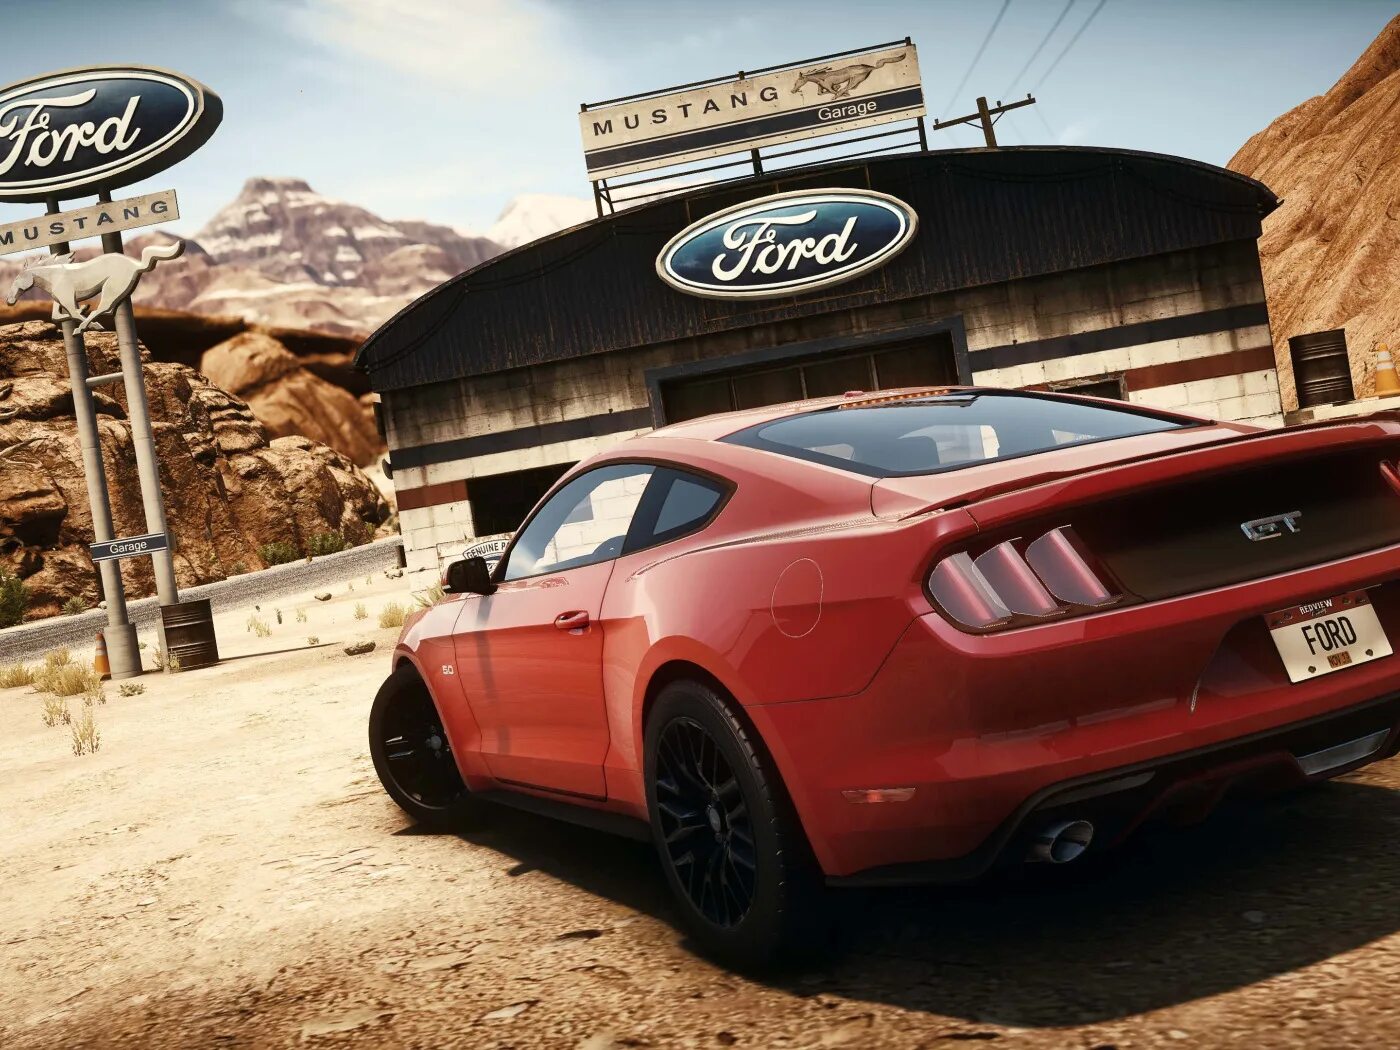 Need for speed мустанг. Форд Мустанг 2015. Ford Mustang 2015. Ford Mustang gt 2015 NFS 2015. Ford Mustang gt 2015 NFS Rivals.